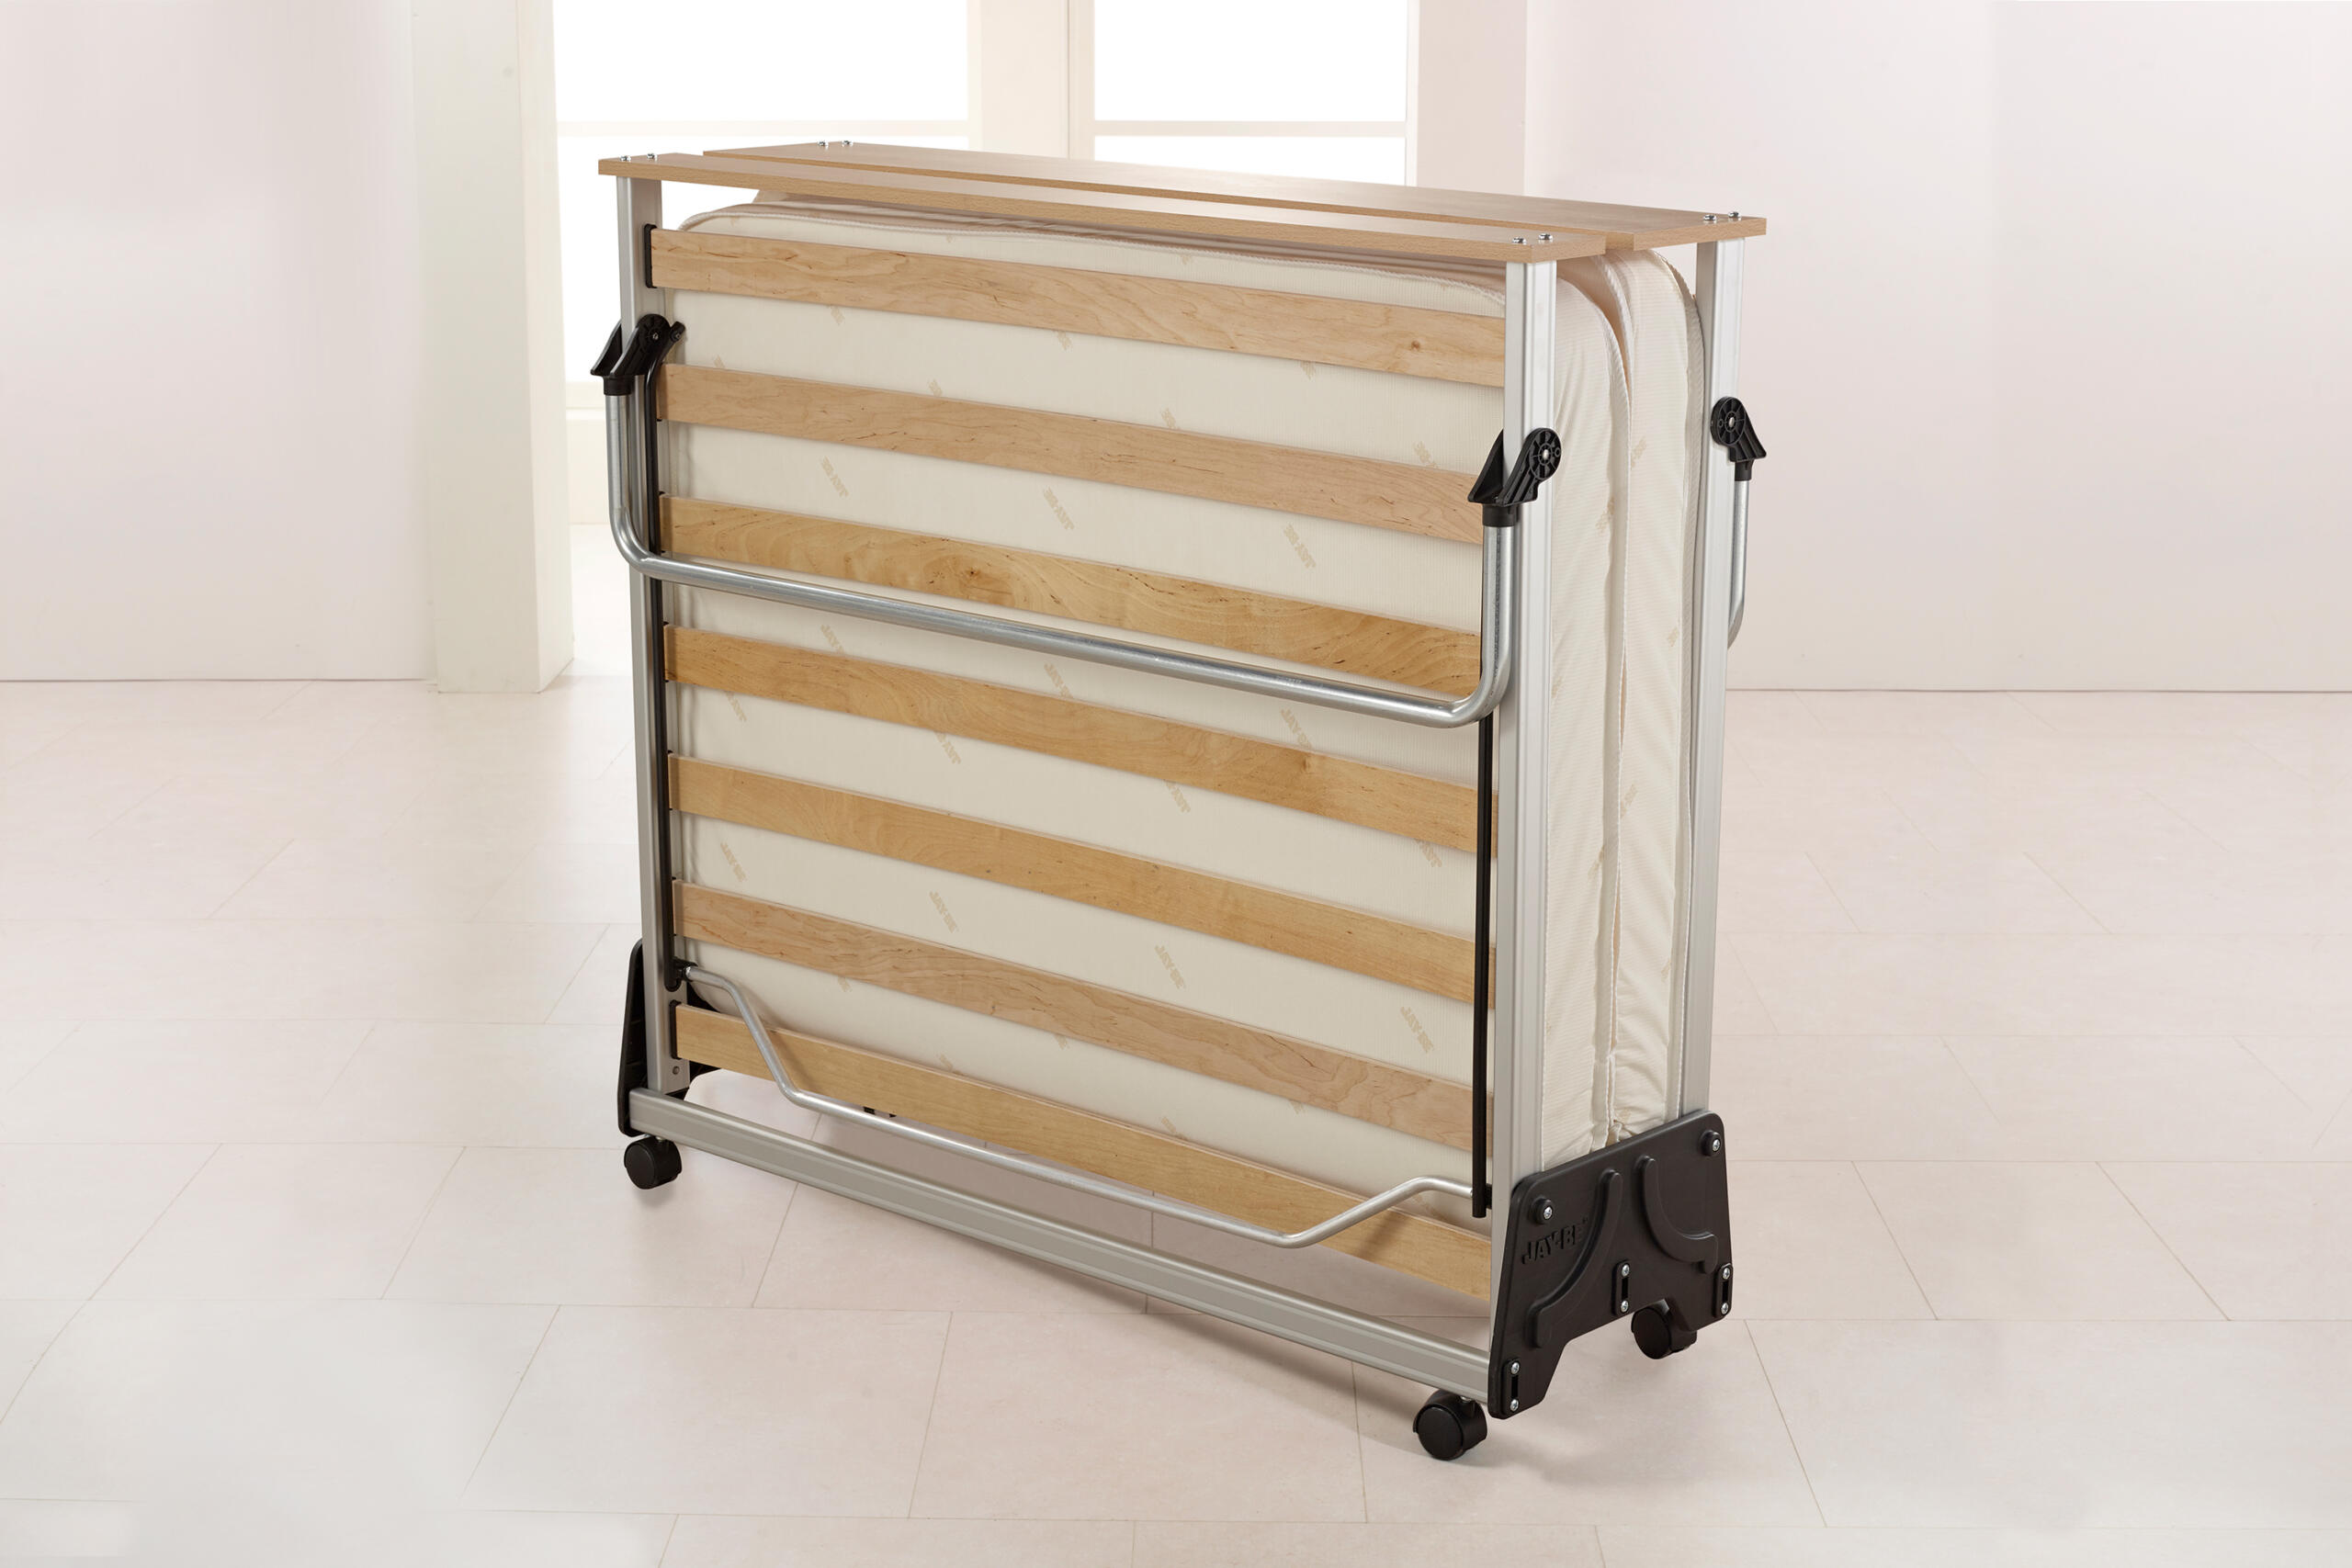 J-Bed Folding Bed with Performance e-Fibre Mattress - Small Double